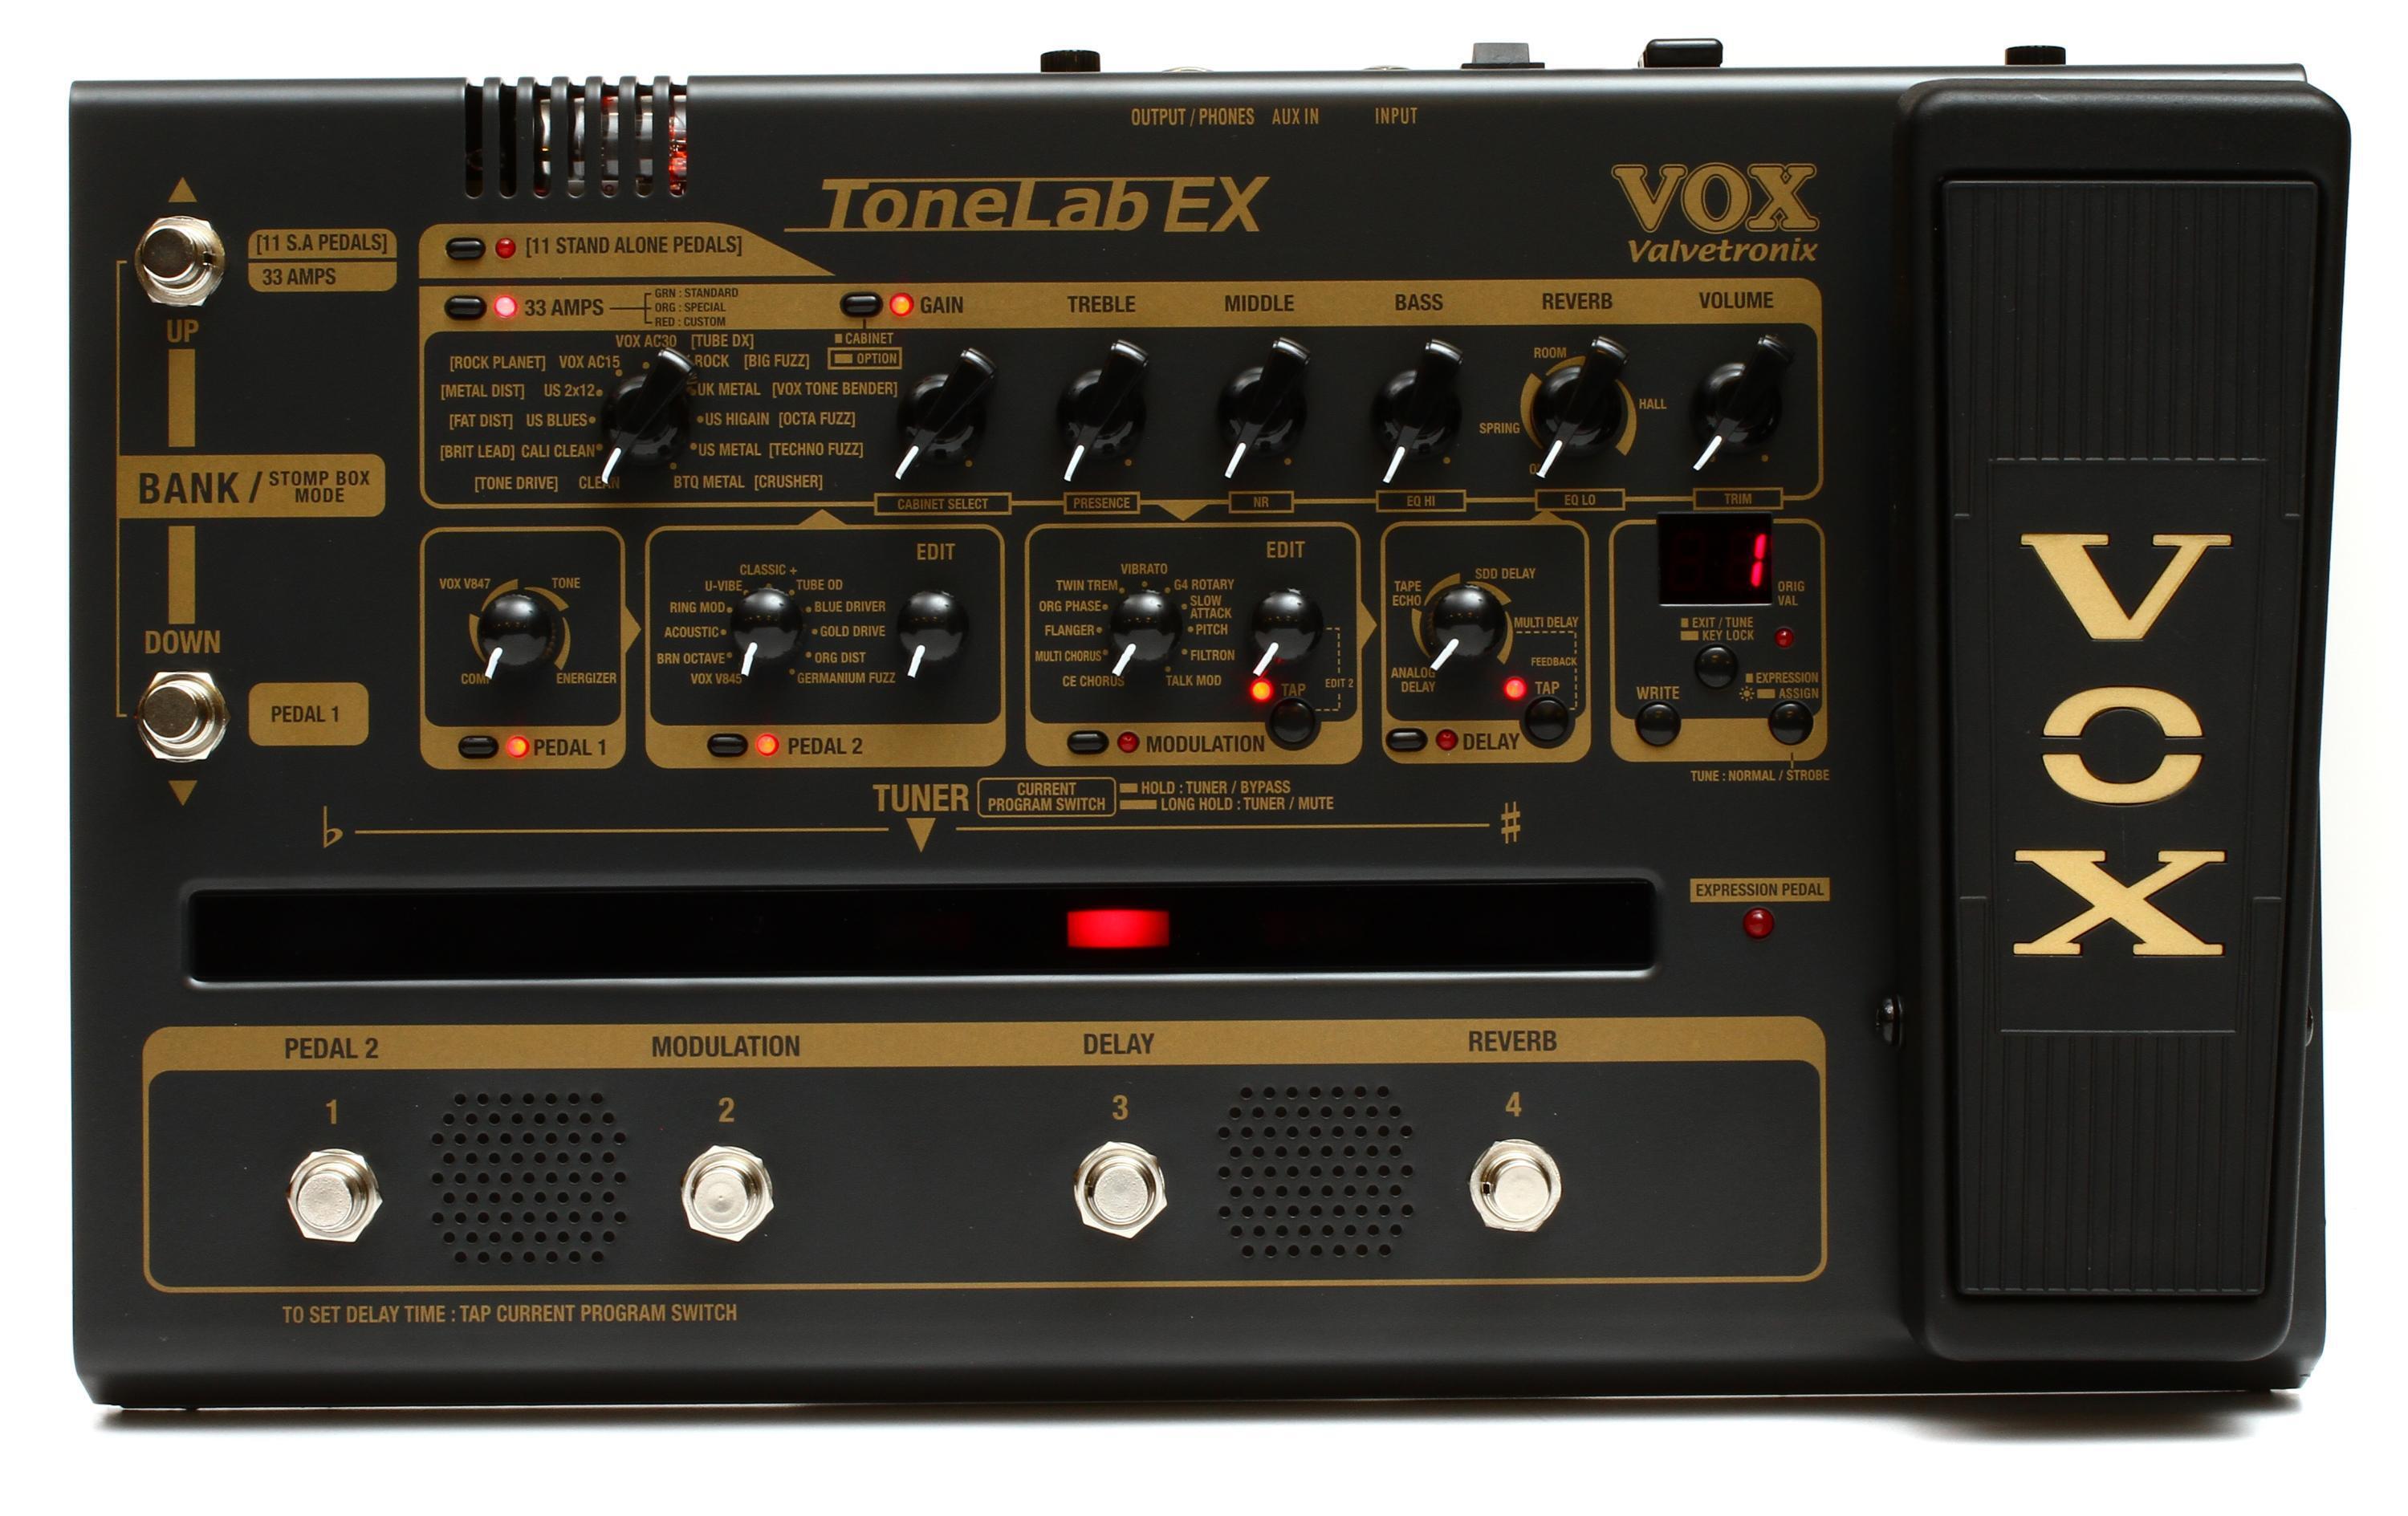 Vox ToneLab EX Multi-FX Pedalboard Reviews | Sweetwater